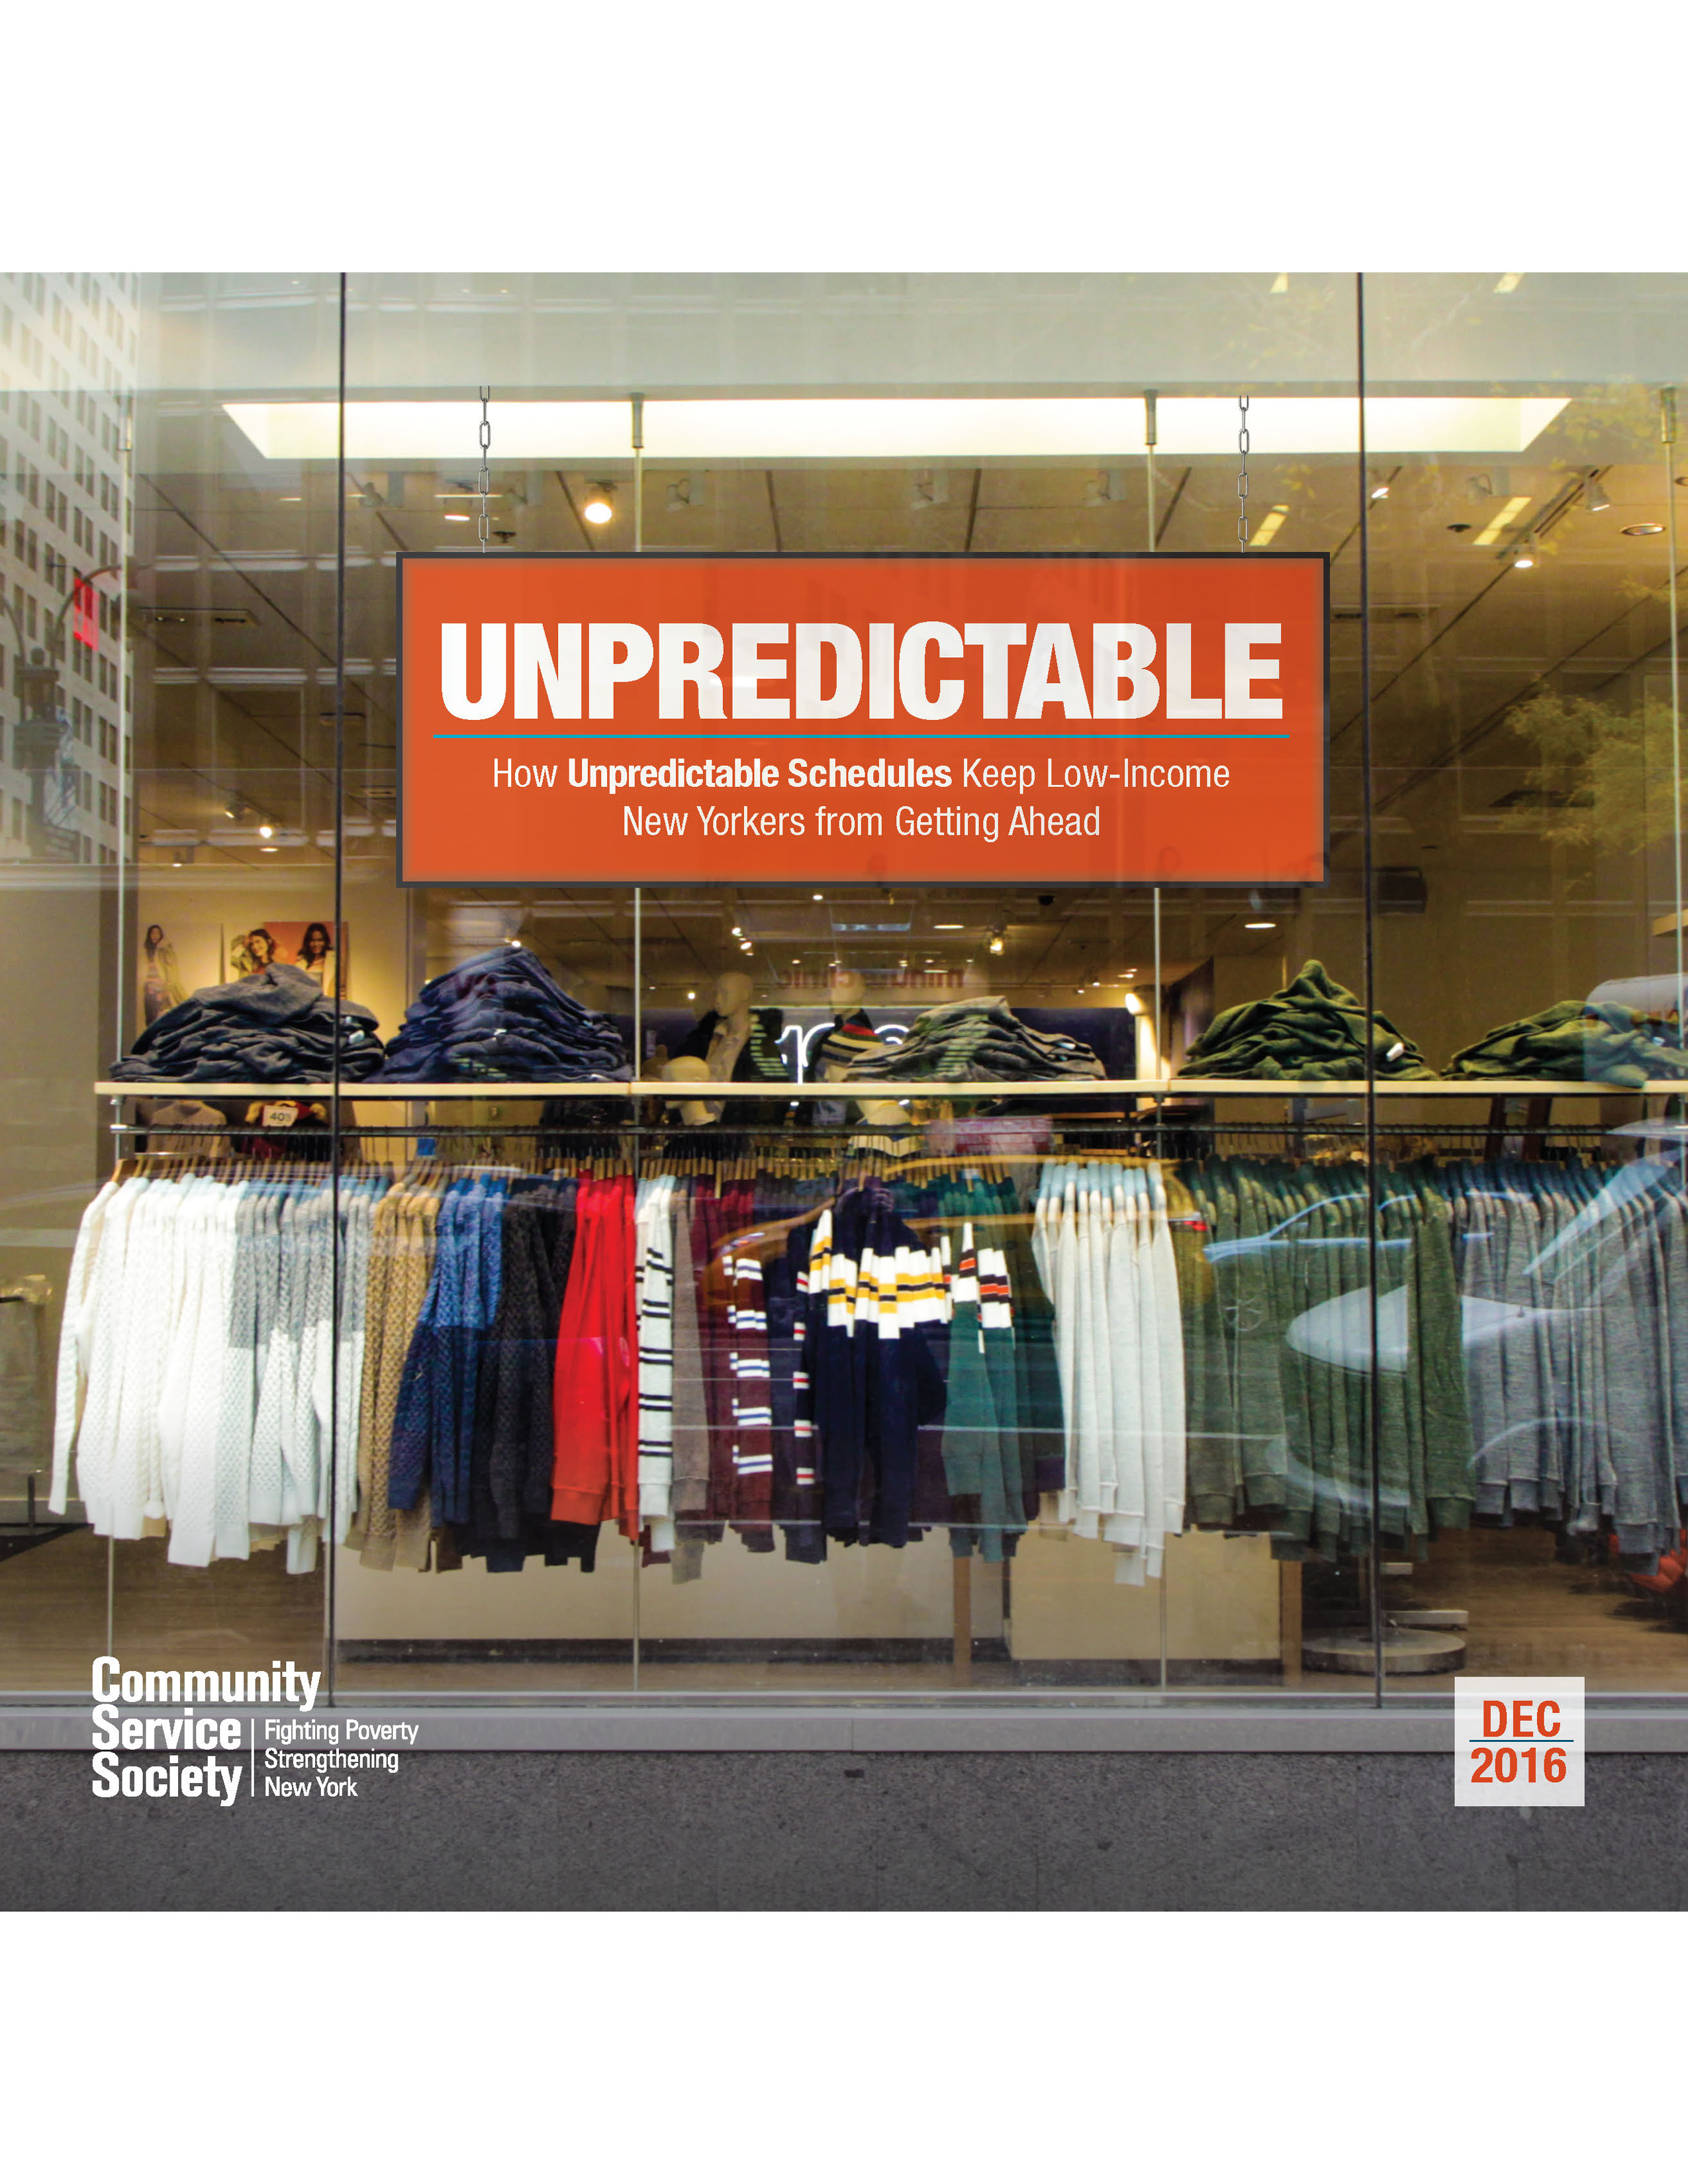 Unpredictable: How Unpredictable Schedules Keep Low-Income New Yorkers From Getting Ahead